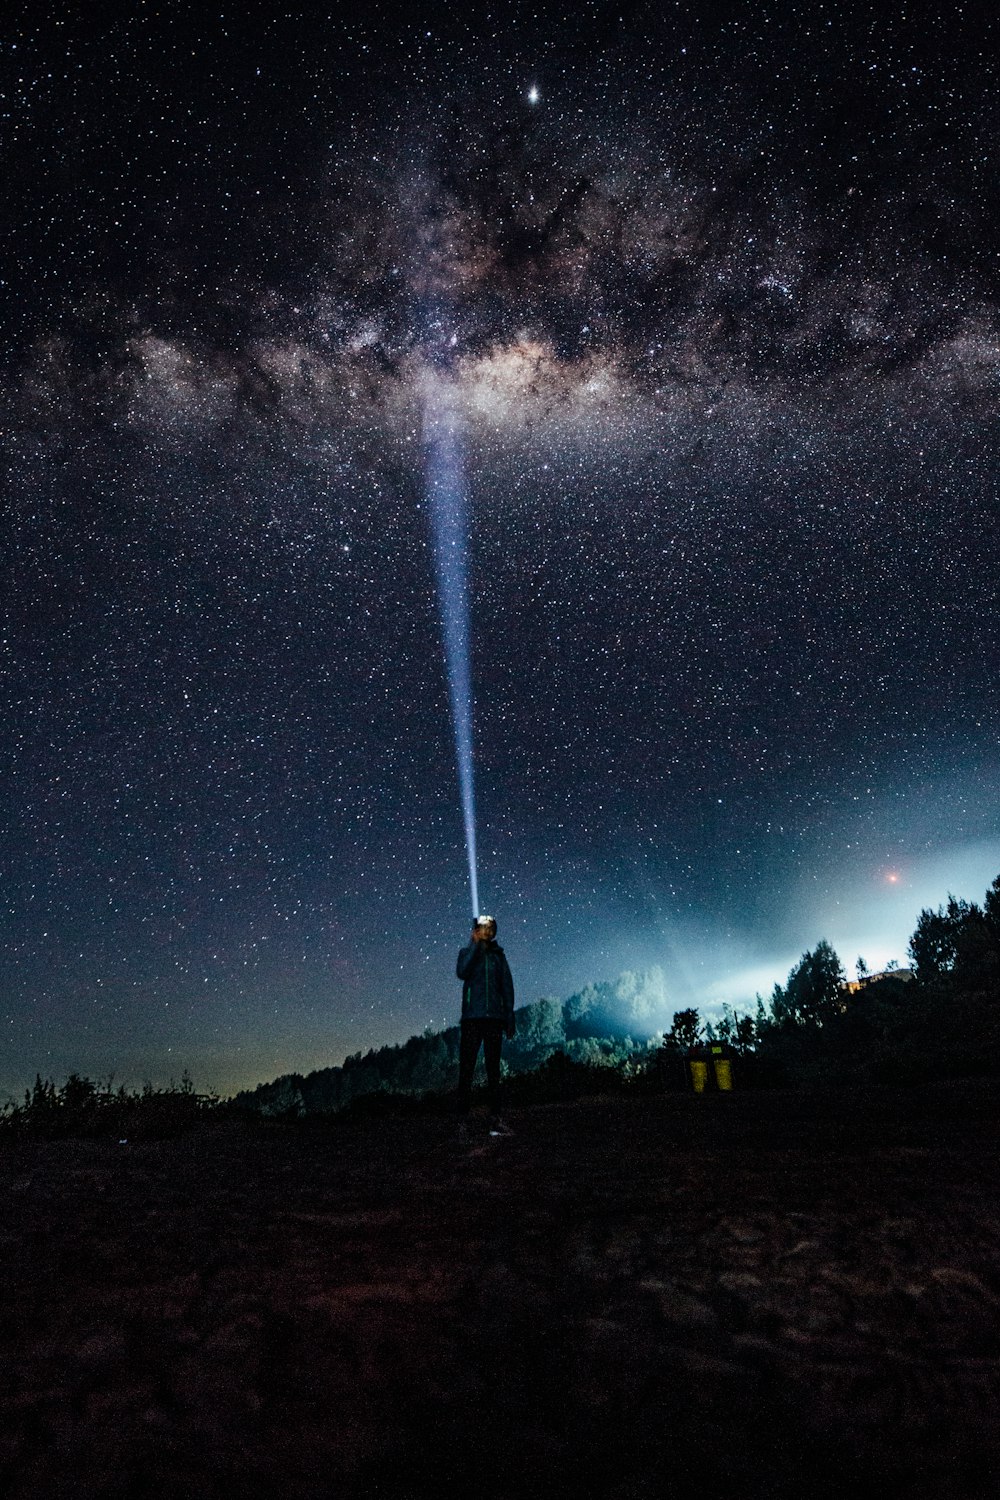 a man standing on a hill under a night sky filled with stars